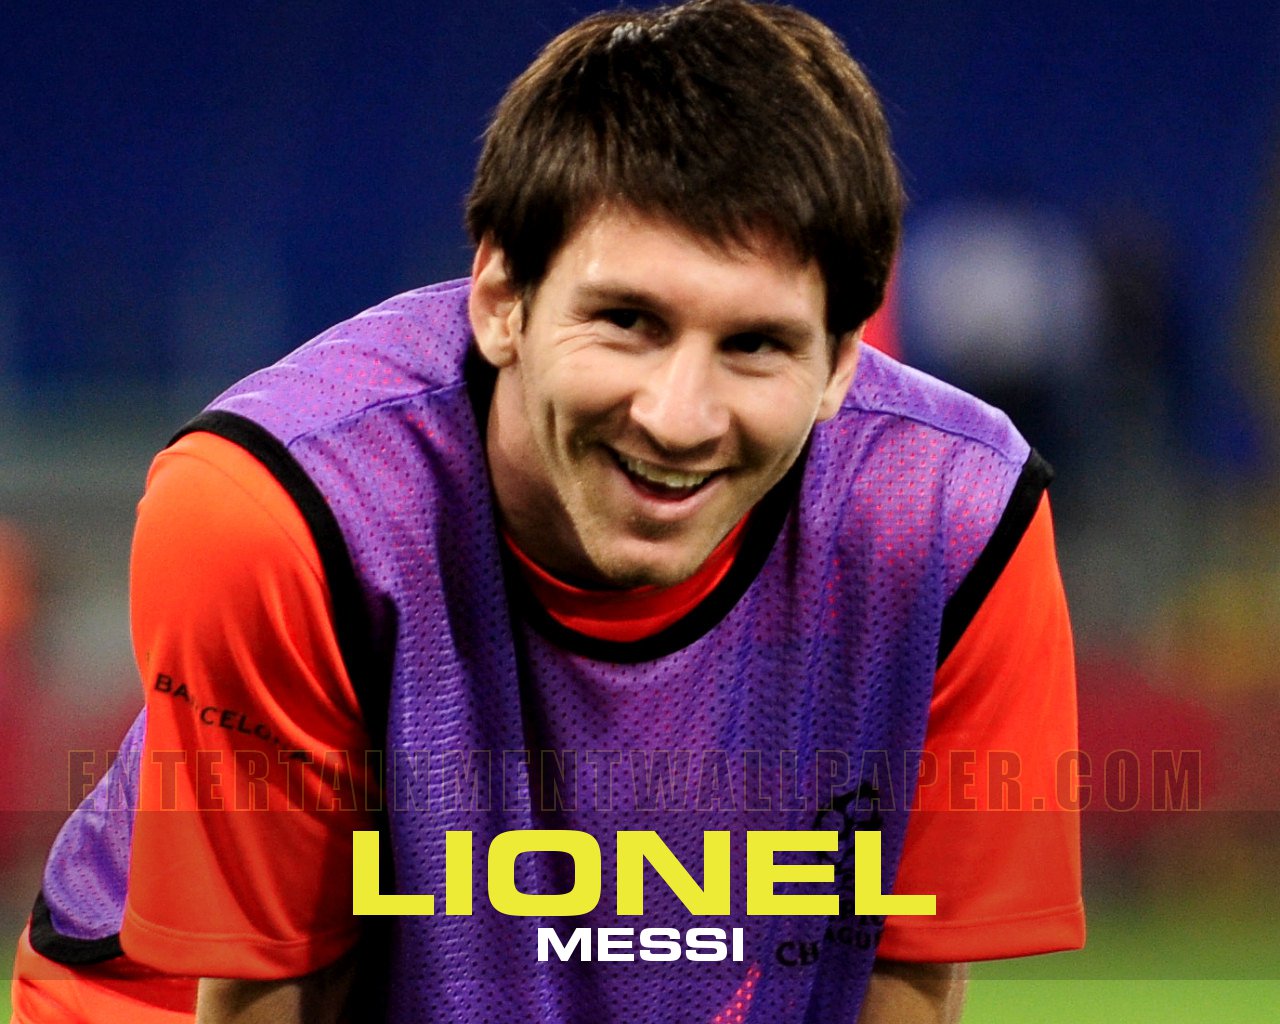  Players Lionel Messi Wallpapers HD   Messi Latest Wallpapers 2012 1280x1024